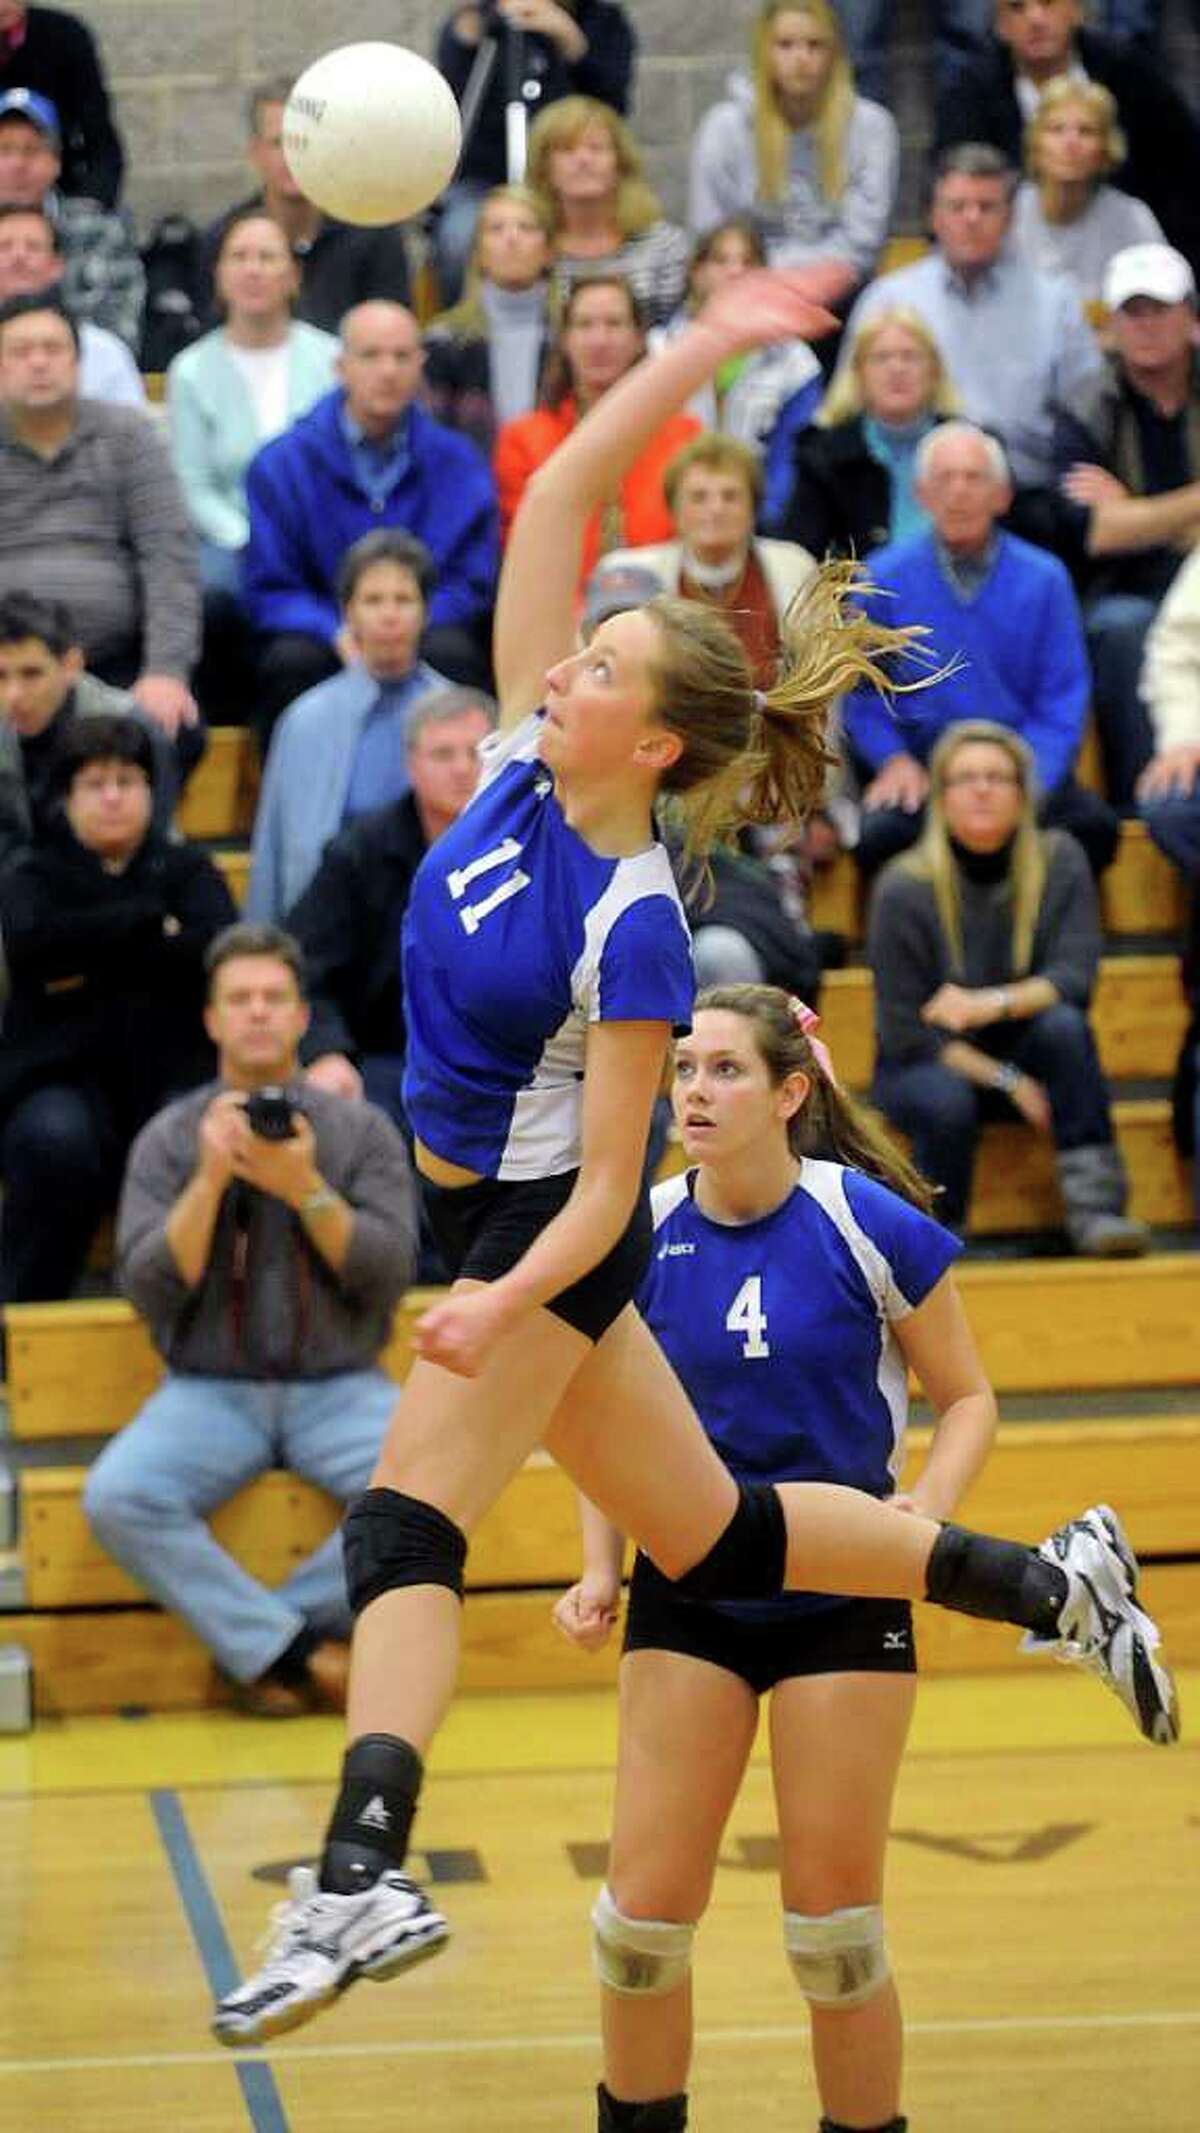 Darien's Katie Stueber spikes the ball during the Girls Volleyball State Tournament Class L Semifinal game against Farmington at Woodland High School on Thursday, November 18, 2010.